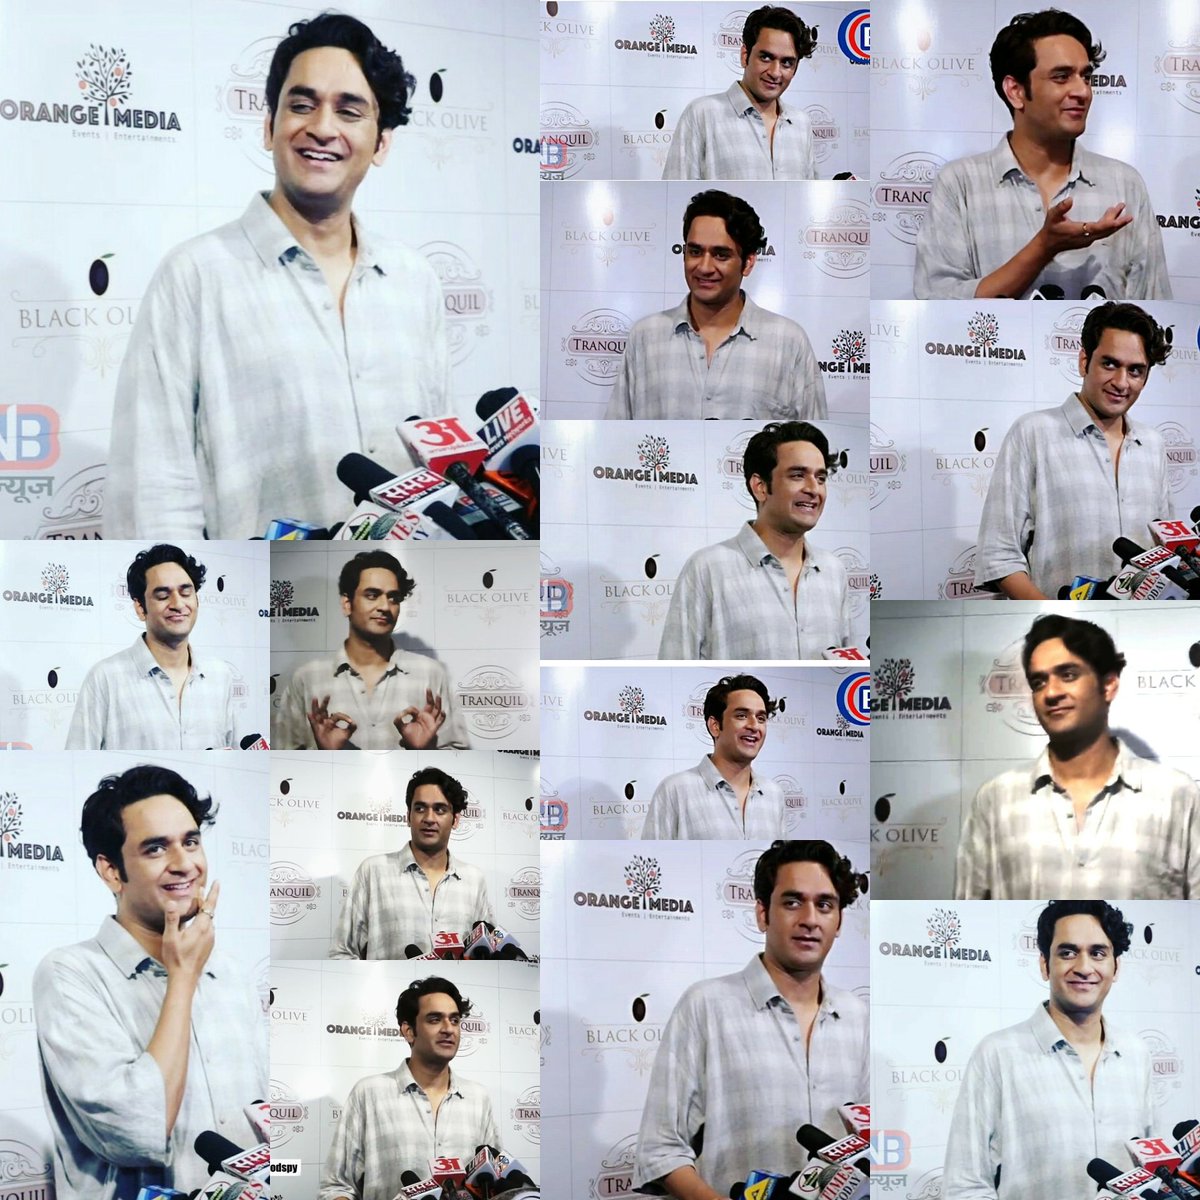 Our @lostboy54 ❤ at #Tanquil club launch yesterday 😊

All Smiling ❤❤❤❤

Ever so charming 😍😍❤❤ 

#VikasGupta 
#lostsouls 
#LaunchNight
#SomeCaptures 🤓